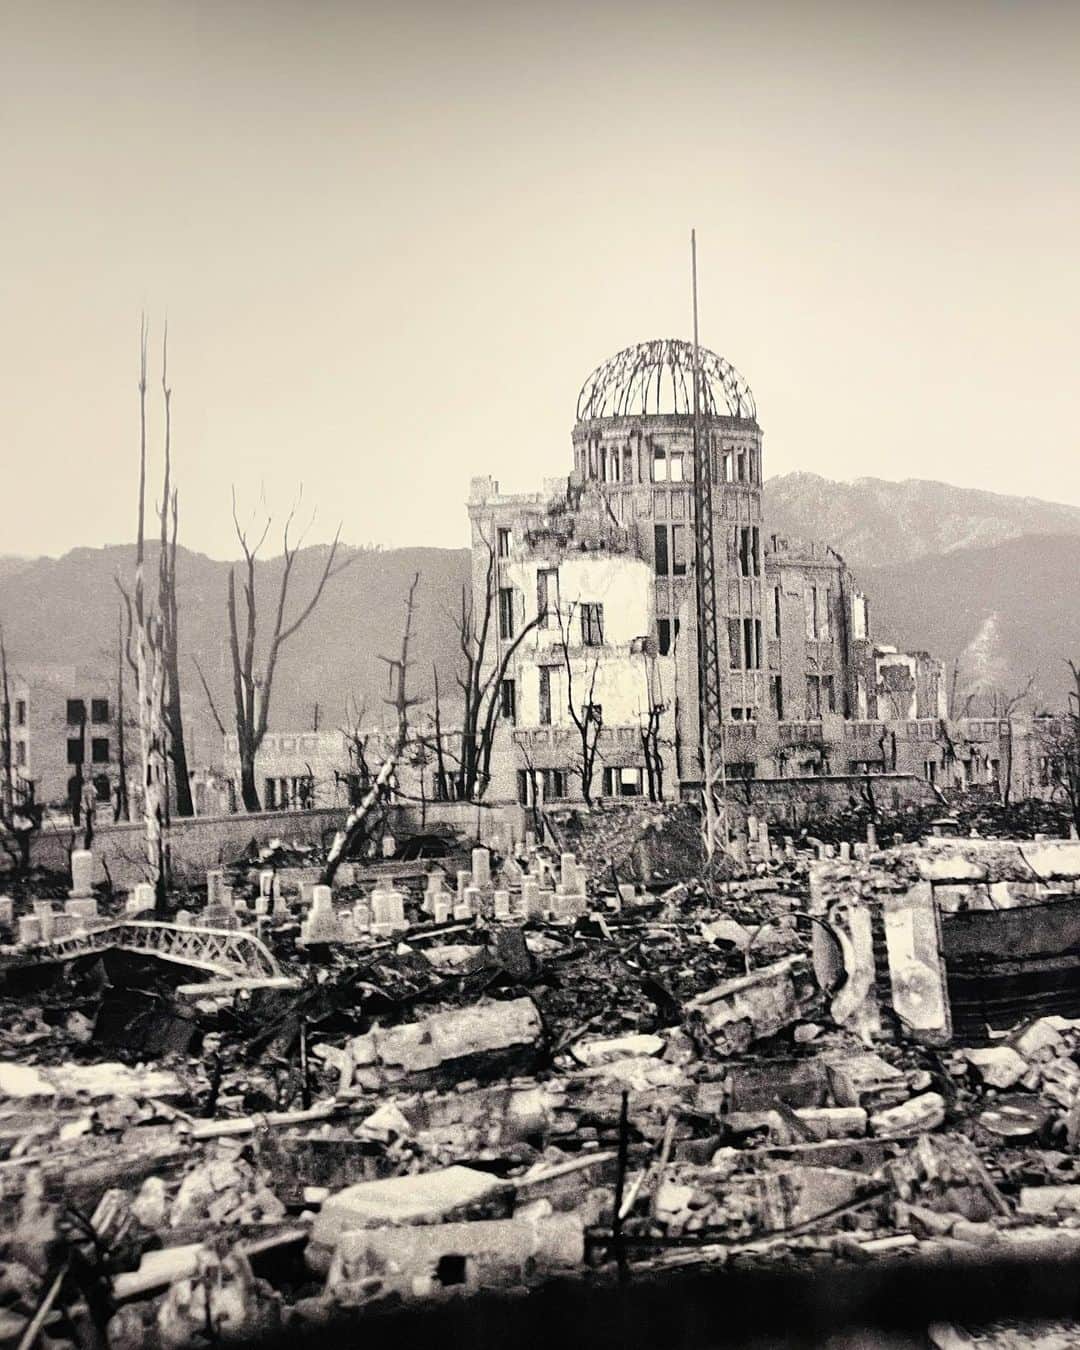 下條ユリさんのインスタグラム写真 - (下條ユリInstagram)「#原爆の日　 August 6th 1945  8:15 AM  U.S. dropped the first atomic bomb code-named “Little Boy” on Hiroshima. Three days later, on Aug 9th, another Atomic bomb was dropped on Nagasaki.  I was diagnosed with cancer. It was fortunate to be found at the earliest stage. My life was saved. Cancer gifted me a new life. I promised myself to visit Hiroshima next time in Japan.   For the first half of this trip, I visited my family roots. The second half was about friendship, the connection between people and nature, and the consciousness expanding from the earth to the cosmic. In between, I visited Hiroshima and spent the whole day at the Peace Memorial Museum. Having been given life again, I thought it was most meaningful to burn into my eyes how humans could ever possibly act in hell under the name of War and how important the dignity of peace is engraved in my heart.  Peace on Earth, August 6, 2023 August 9, 2023  8月6日広島の日。 8月9日長崎の日。  幸いにも健康診断で癌の早期発見ができたわたしは、最新医療を受けて完治し、再び命を与えてもらいました。そして、帰国したらぜったいに広島を訪れようと思っていました。  旅の前半は、自分の家族とルーツを訪ねました。そして後半は、友情、人と自然との繋がり、地球から宇宙へと意識が広がった旅でした。その途中に広島に一泊し、原爆記念館でまる一日を過ごしました。人間が、戦争という名のもとに犯した地獄。その記録を目に焼きつけ、平和の尊厳を心に刻めたことは、何よりも意味のあることでした。  地球に平和を、黙祷。 2023年8月6日、8月9日  #AtomicBomb  #PeaceOnEarth  #地球に平和を」8月7日 0時23分 - yurishimojo